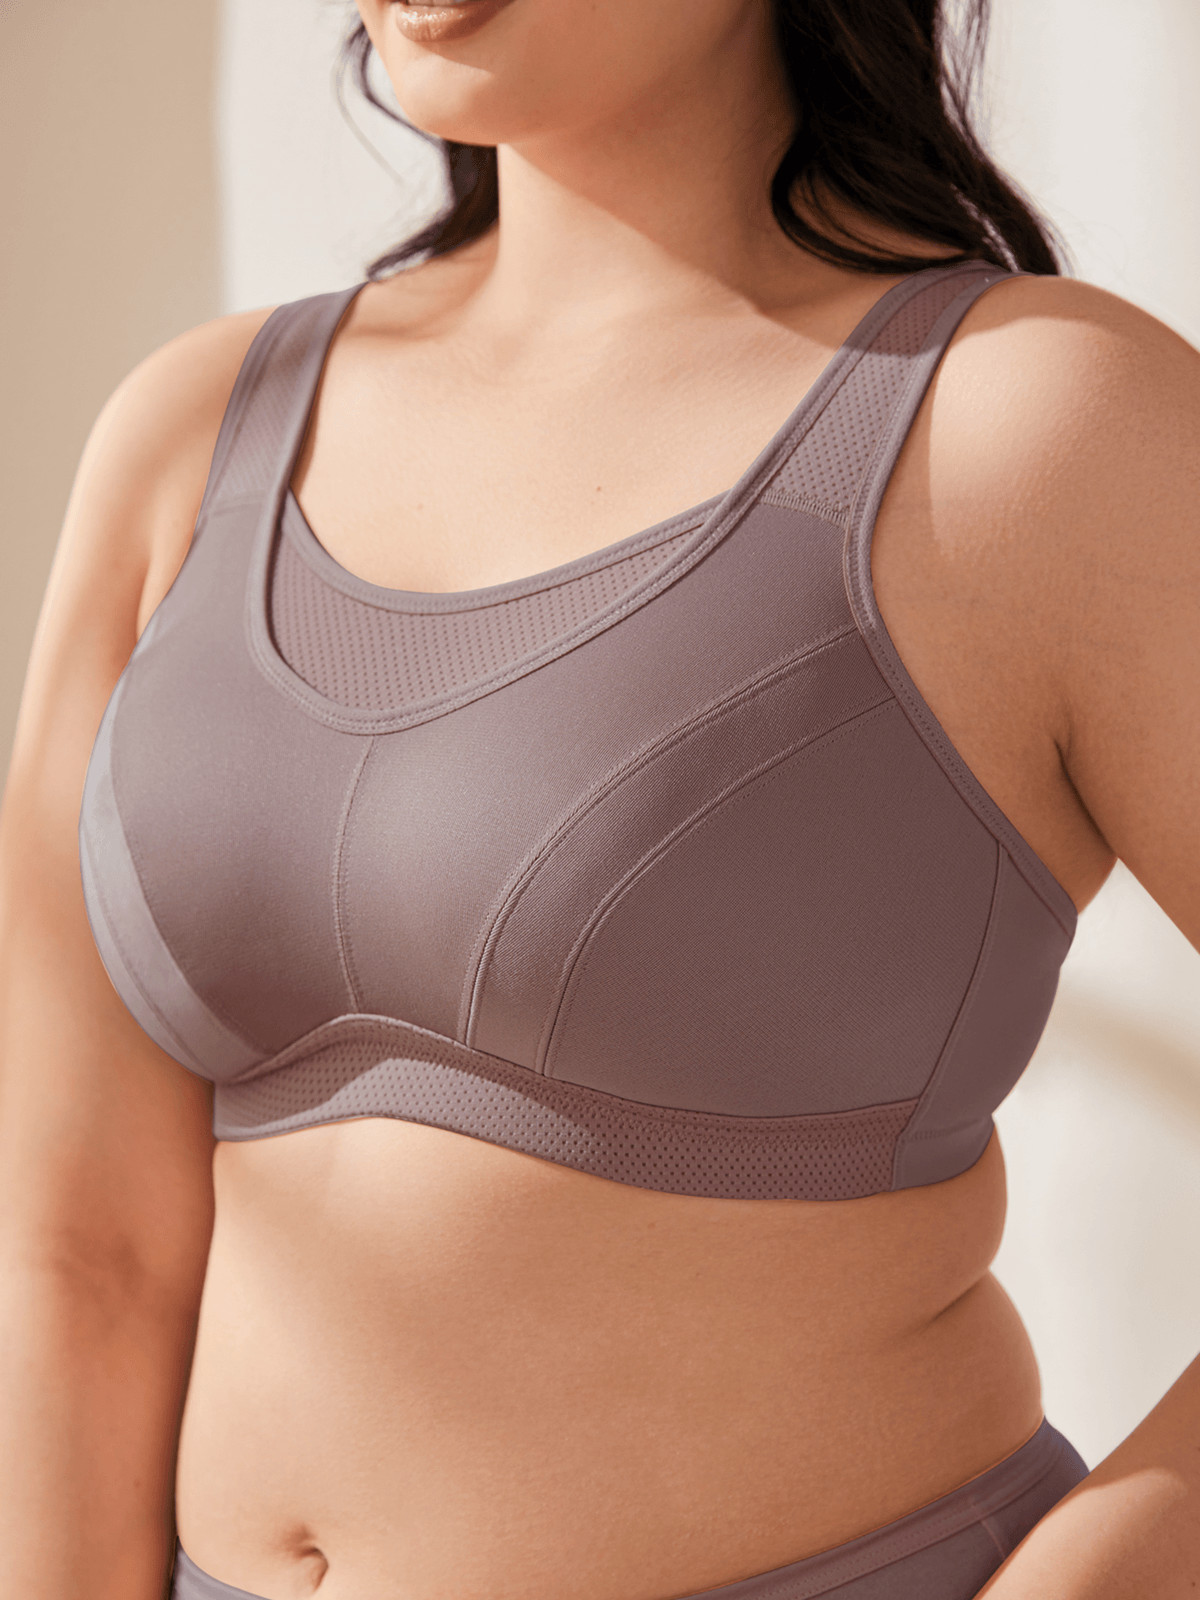 AGONVIN Women's High Impact Support Wirefree Bounce Control Plus Size  Workout Sports Bra Gray 38D 